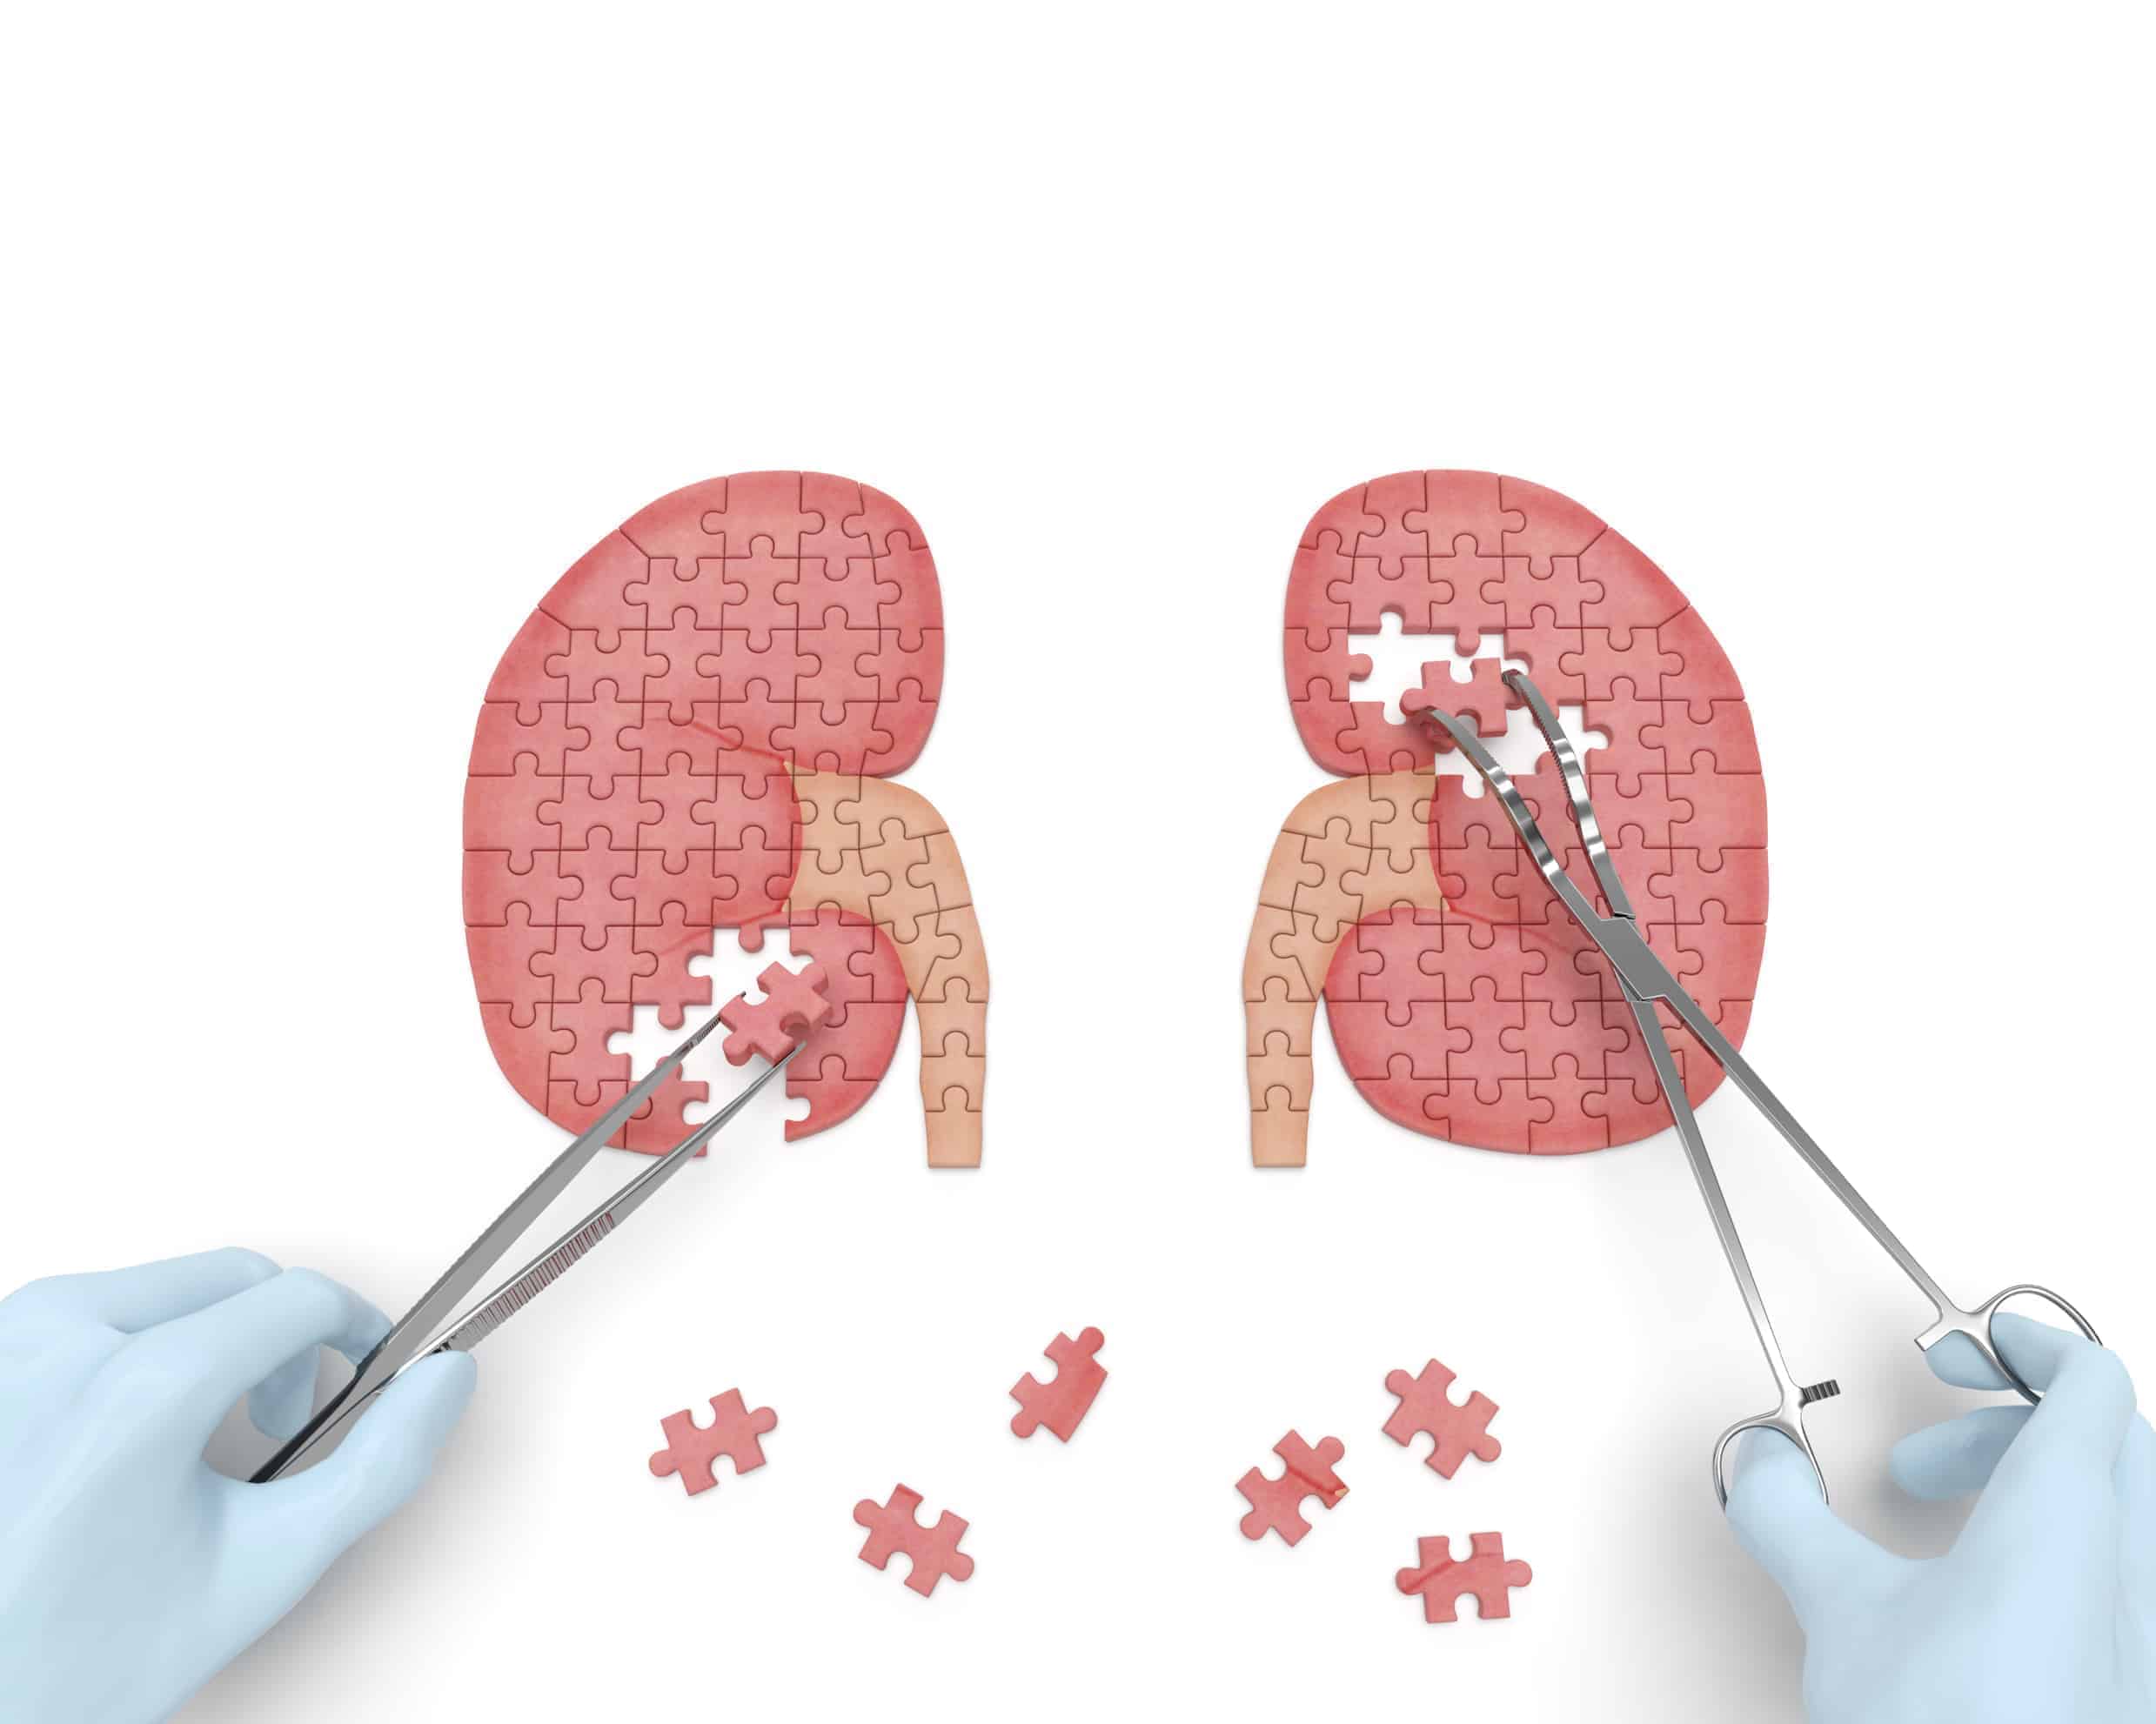 causes of CKD, causes of renal failure, causes of kidney disease, what causes kidney disease, what causes CKD, do I have CKD